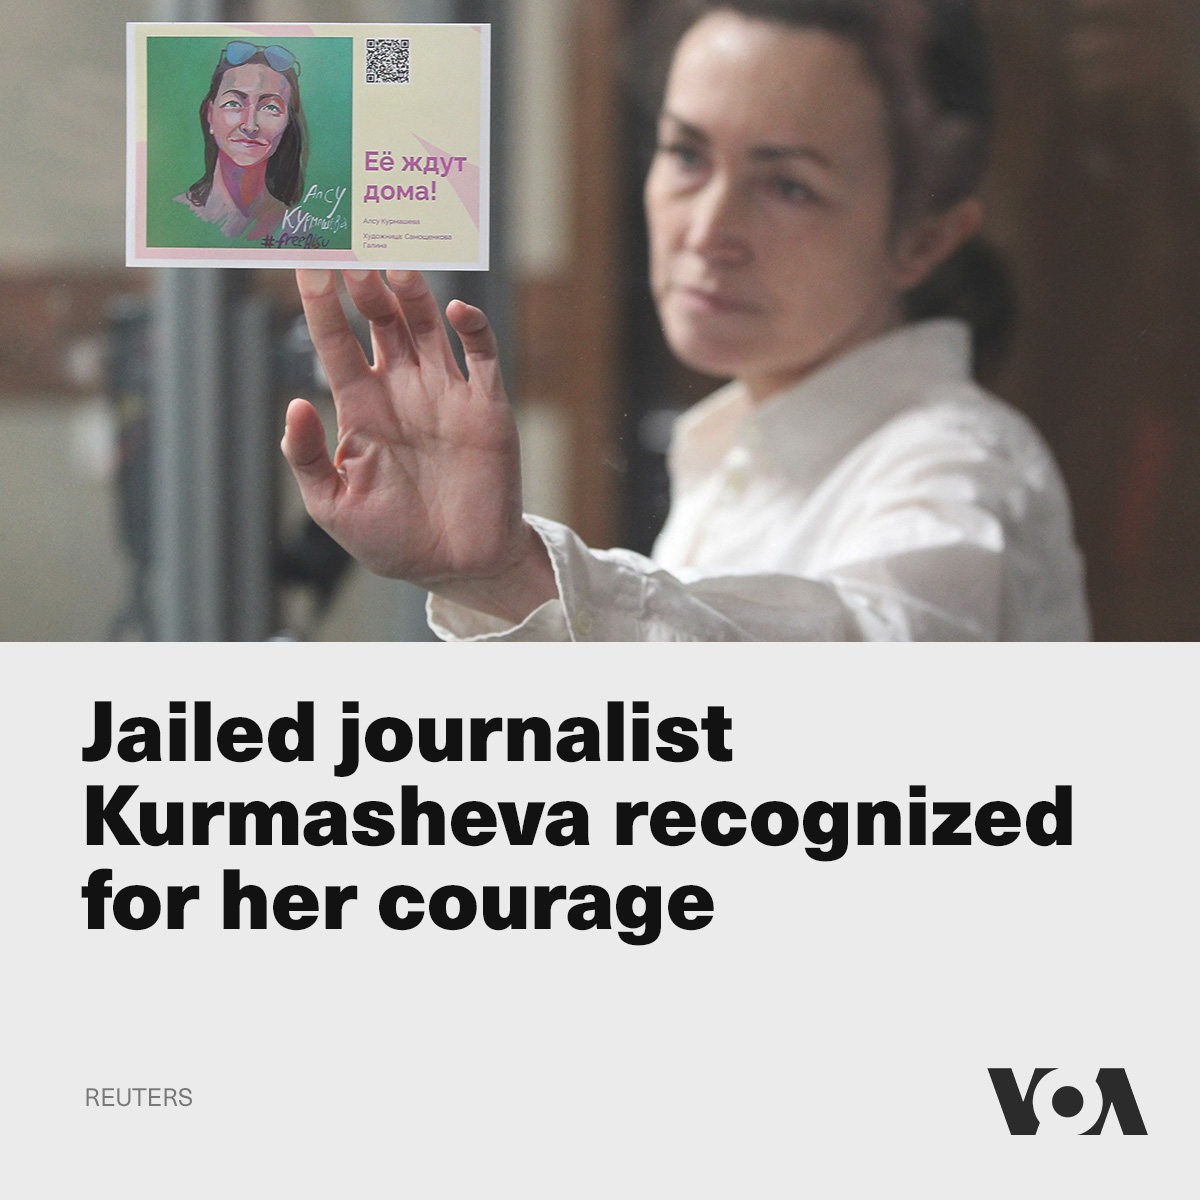 Jailed journalist Kurmasheva recognized for her courage voanews.com/a/jailed-journ…